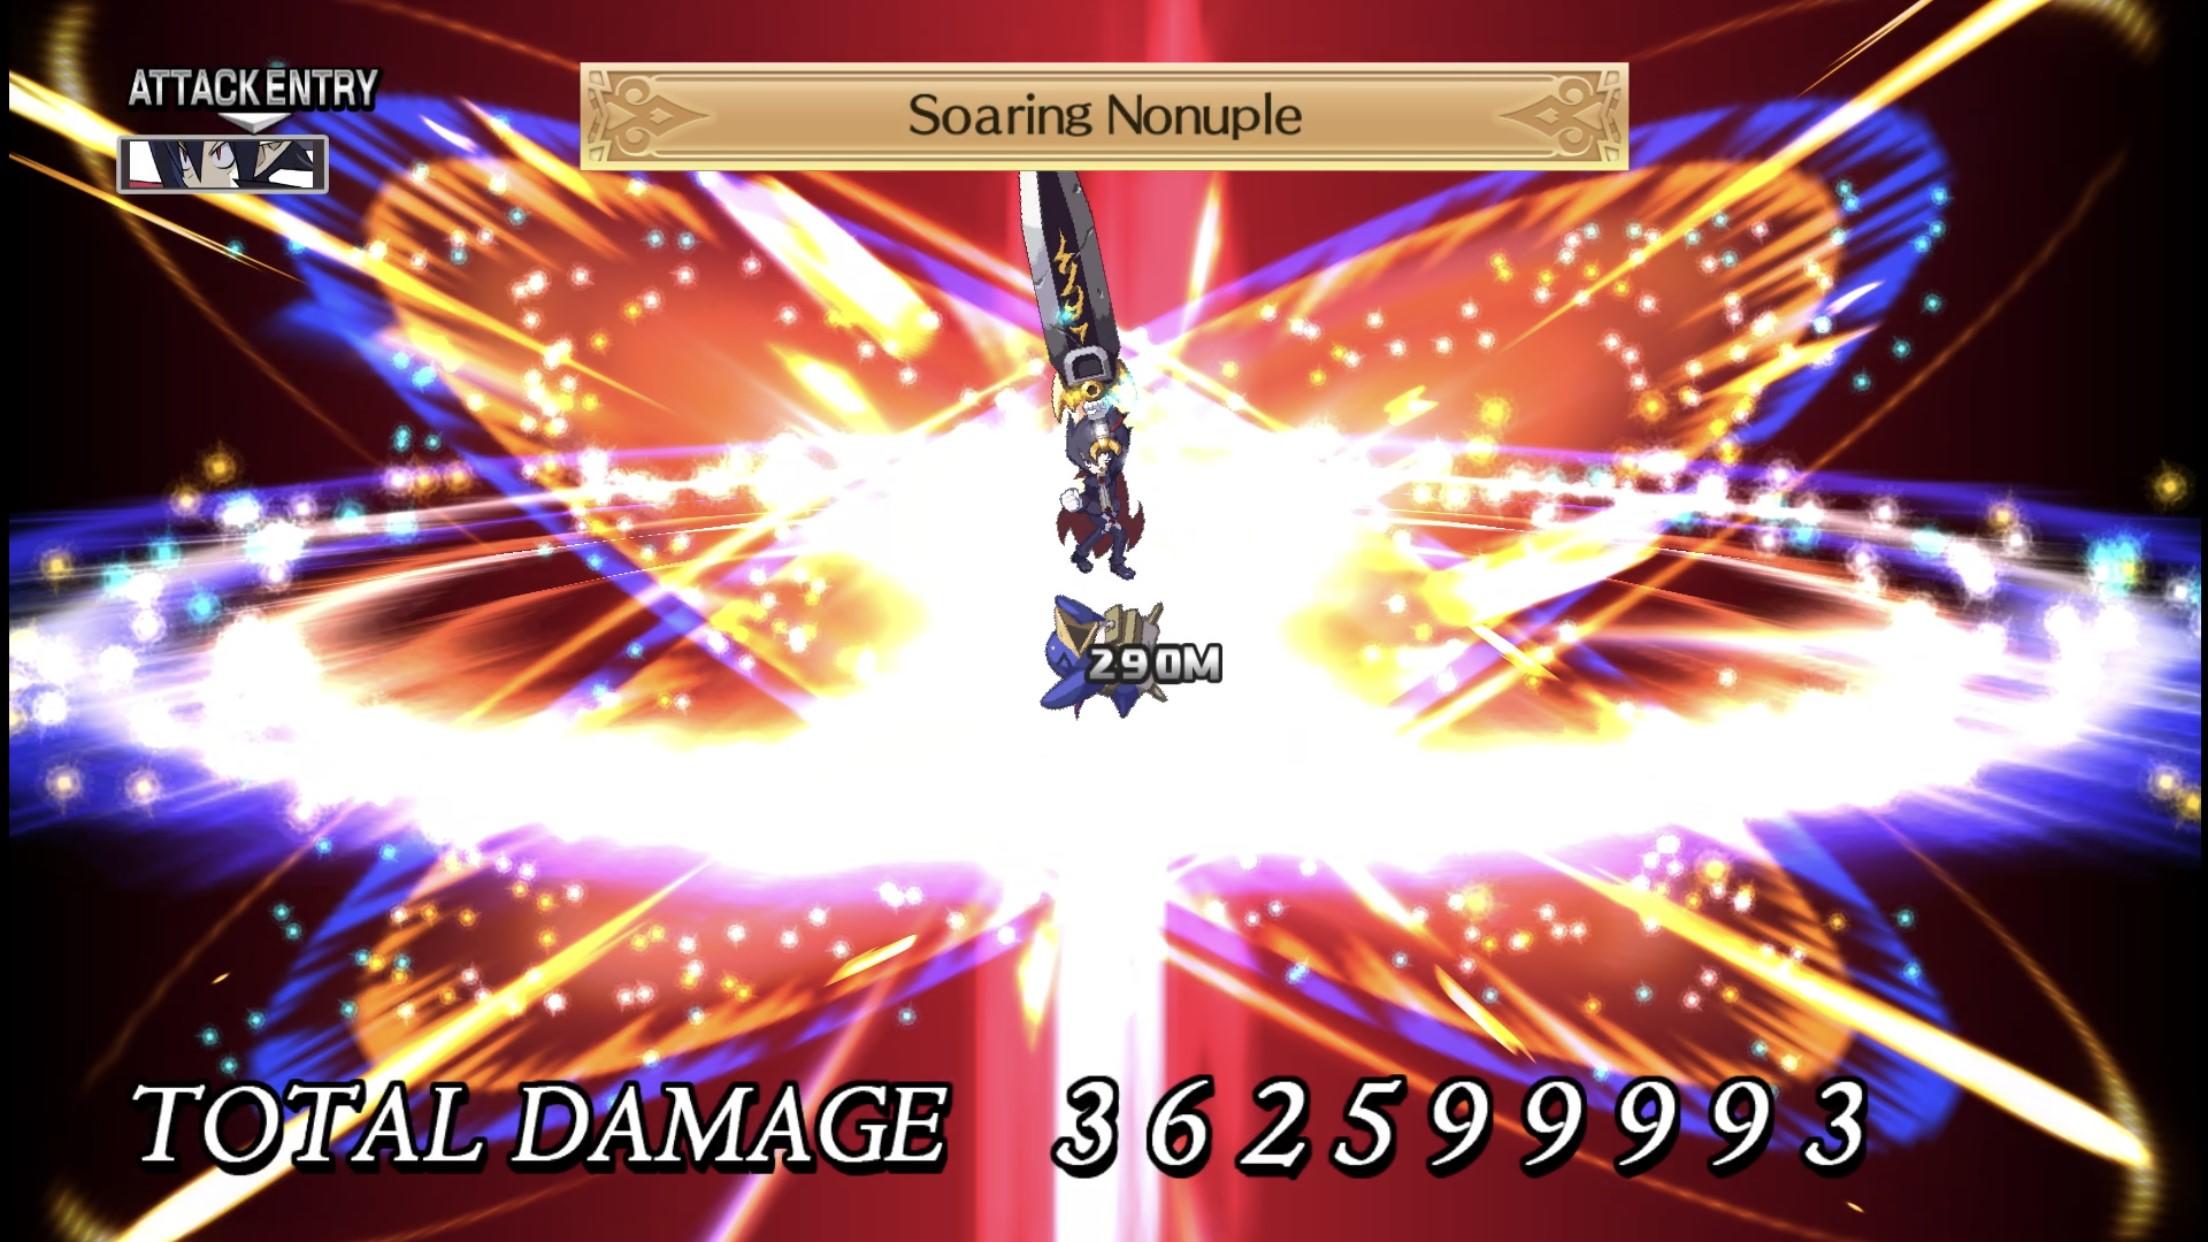 Disgaea 4: A Promise Revisited screenshot game